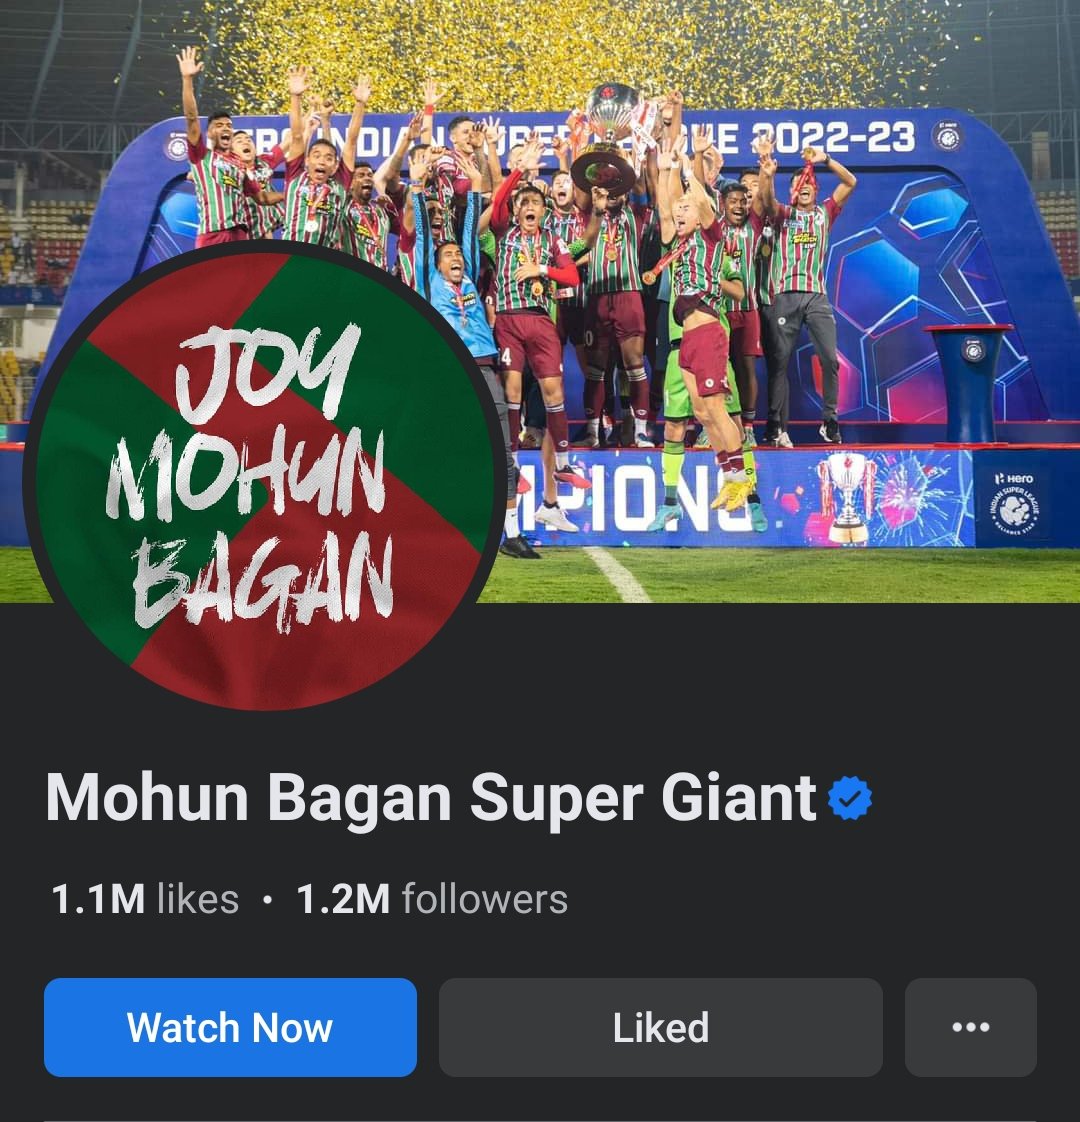 🚨✅ 'Mohun Bagan Super Giant' Is done in Facebook. 

Just waiting for the Logo and Jersey now!!! 

#mohunbagan #isl #newlogo